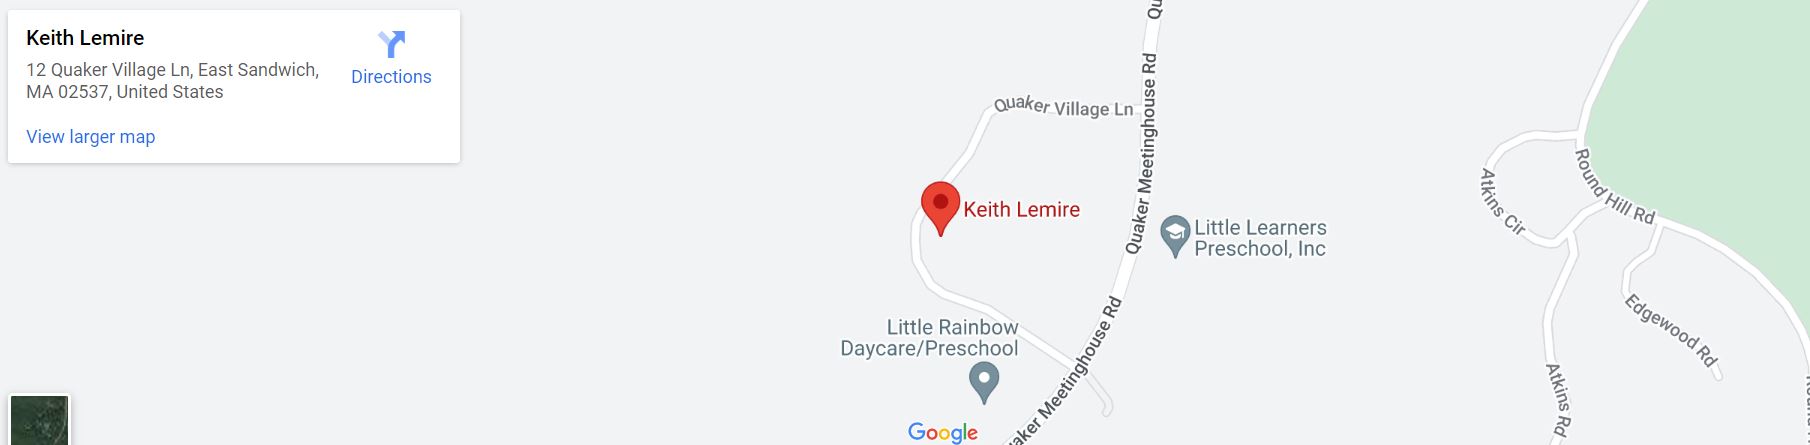 keith map